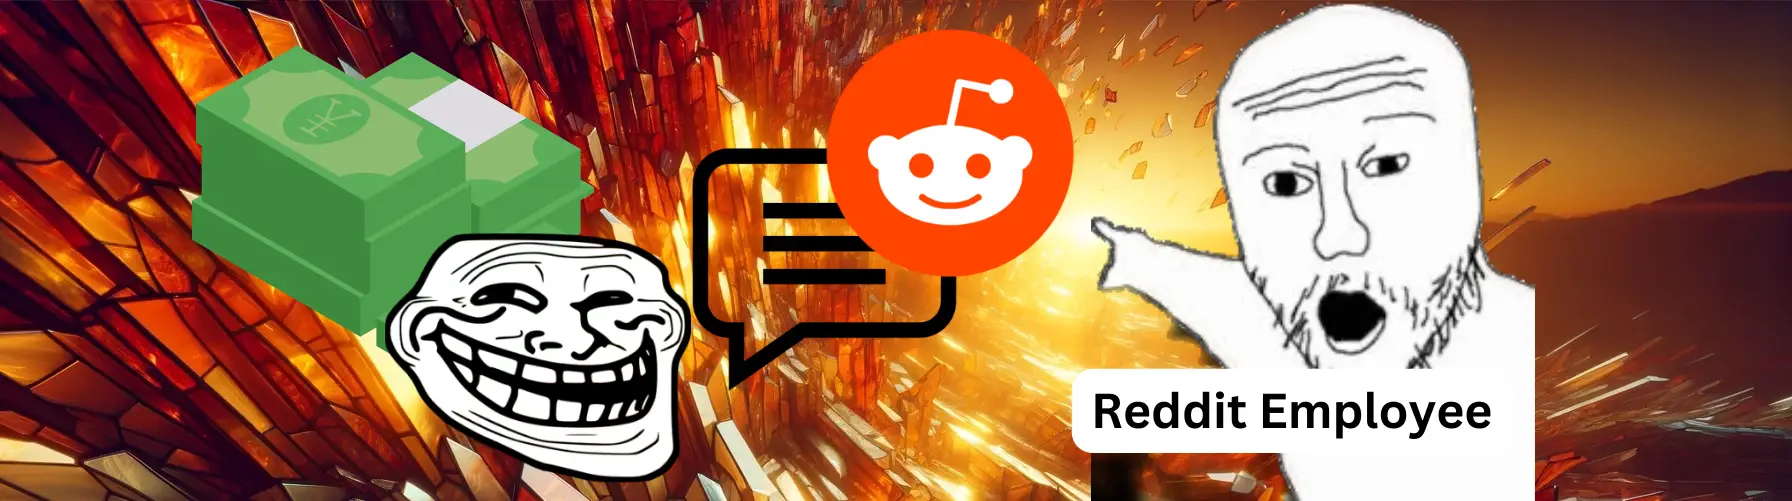 The image depicts meme characters and icons representing Reddit, money, and a comment. The background is a glass mosaic.